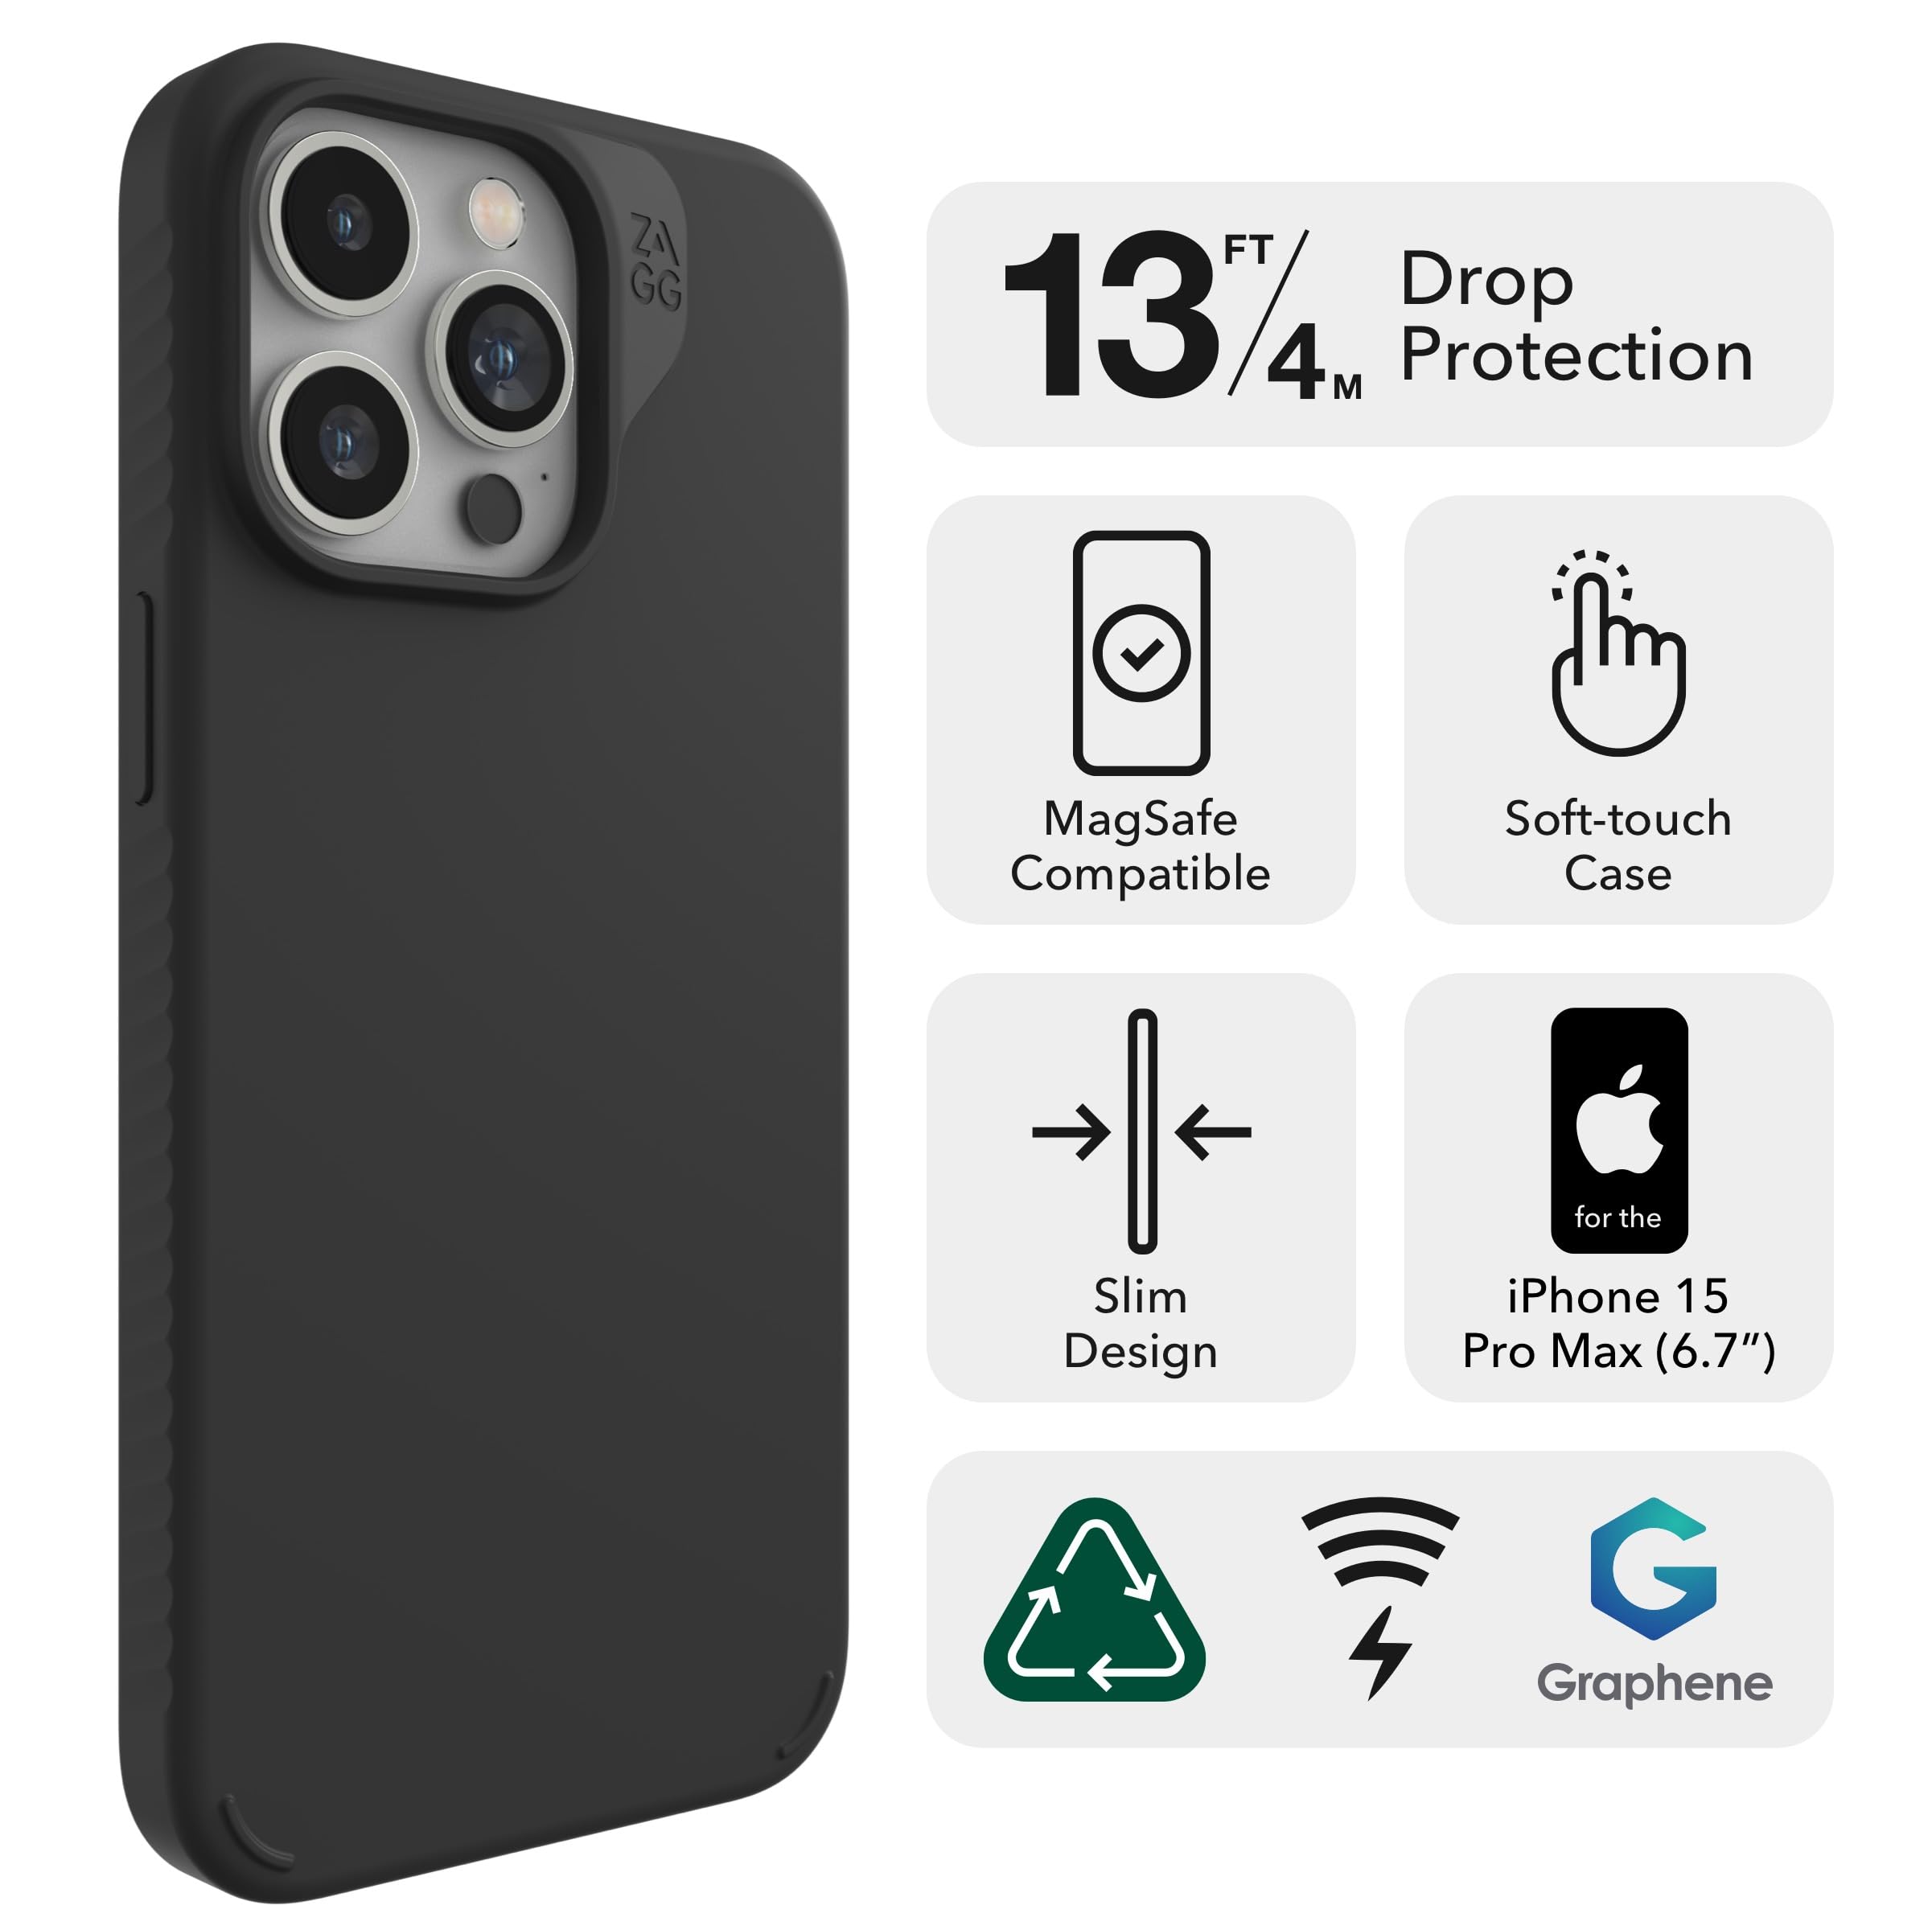 ZAGG Manhattan Snap iPhone 15 Pro Max Case - Premium Silicone iPhone Case, Durable Graphene Material, Smooth Surface with a Comfortable Ripple Grip, MagSafe Phone Case, Red